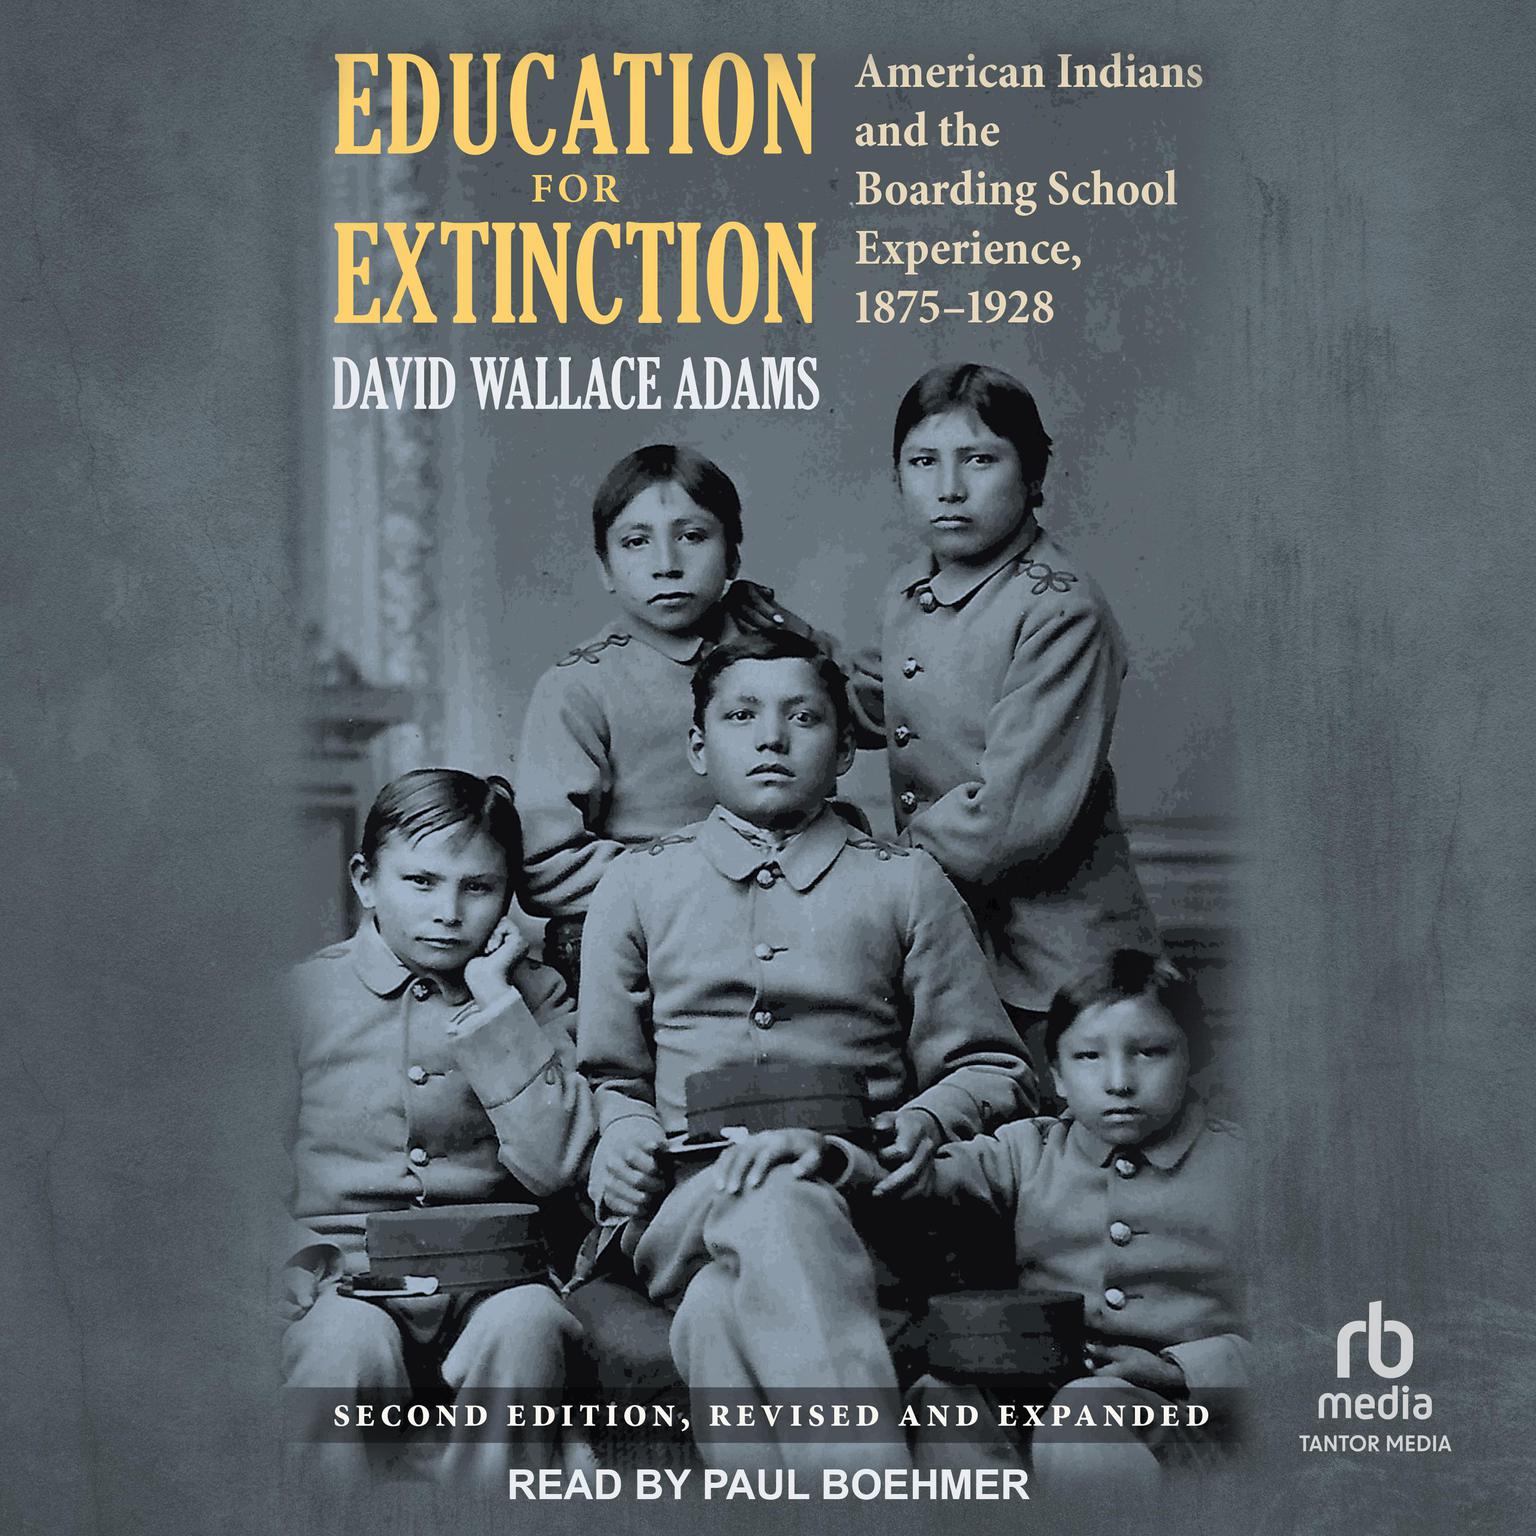 Education for Extinction: American Indians and the Boarding School Experience, 1875-1928 Audiobook, by David Wallace Adams